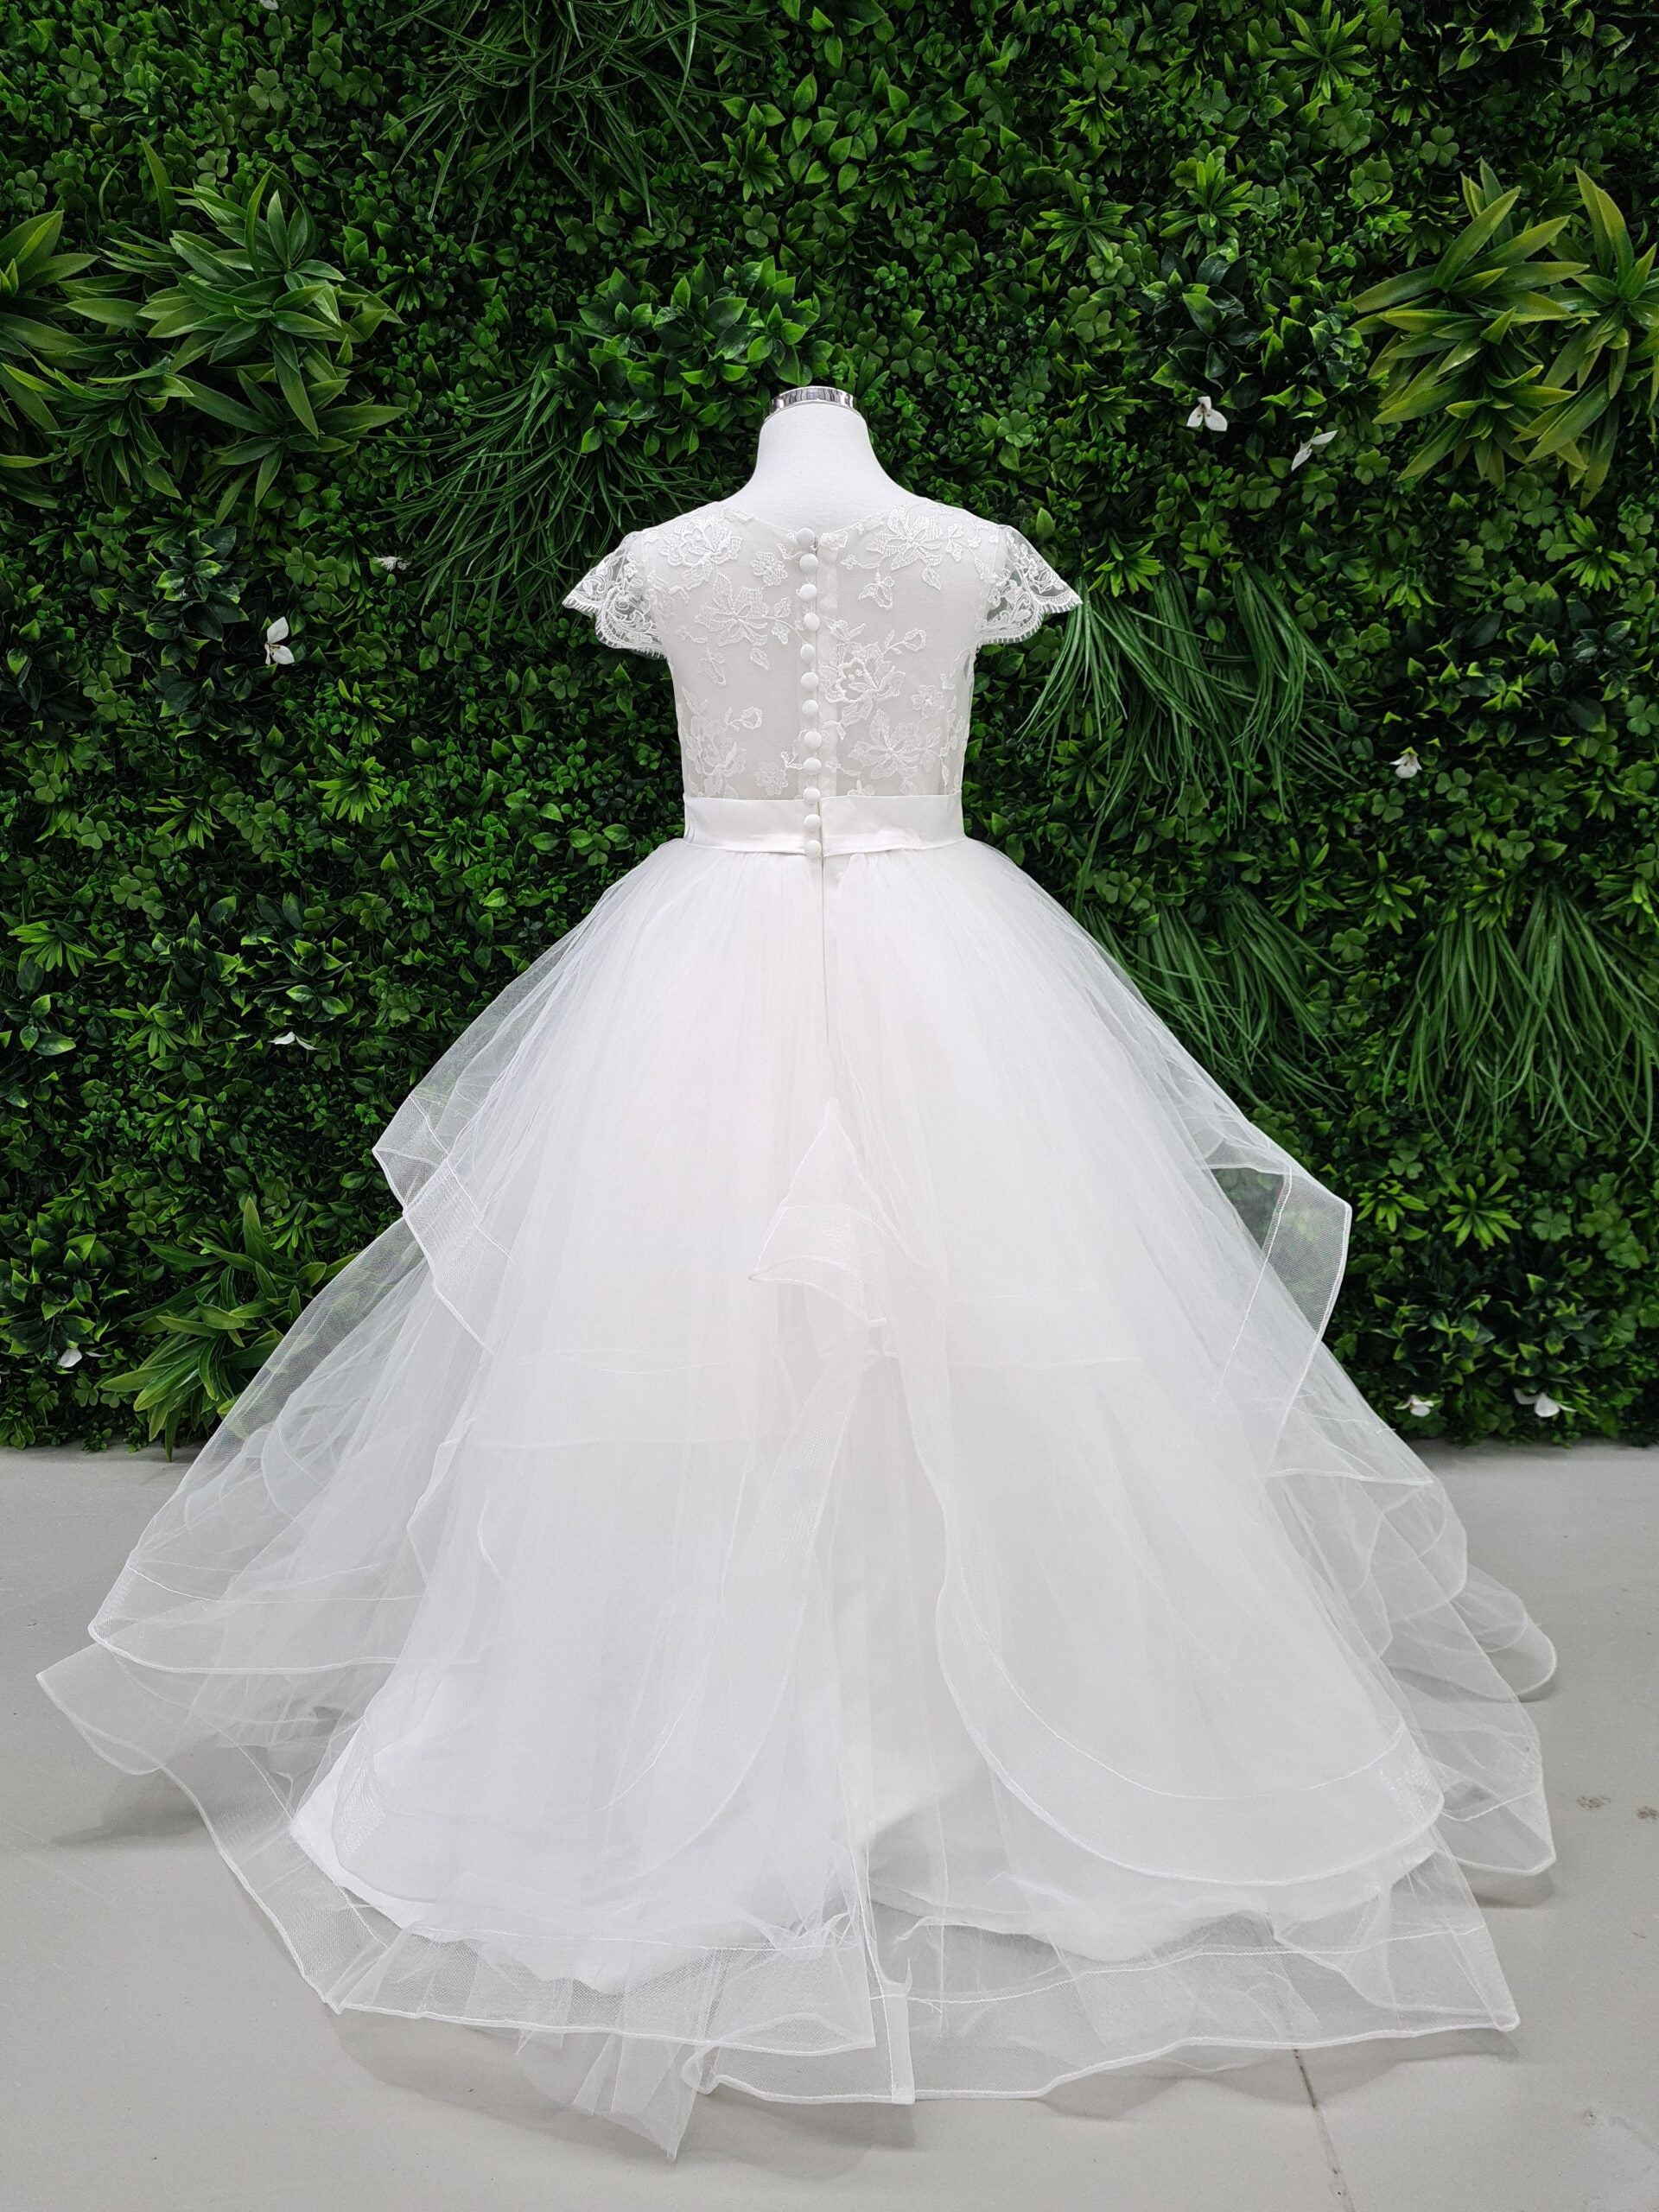 Made To Order - Luxury Handmade Flower Girl Dress with Horsehair Trim